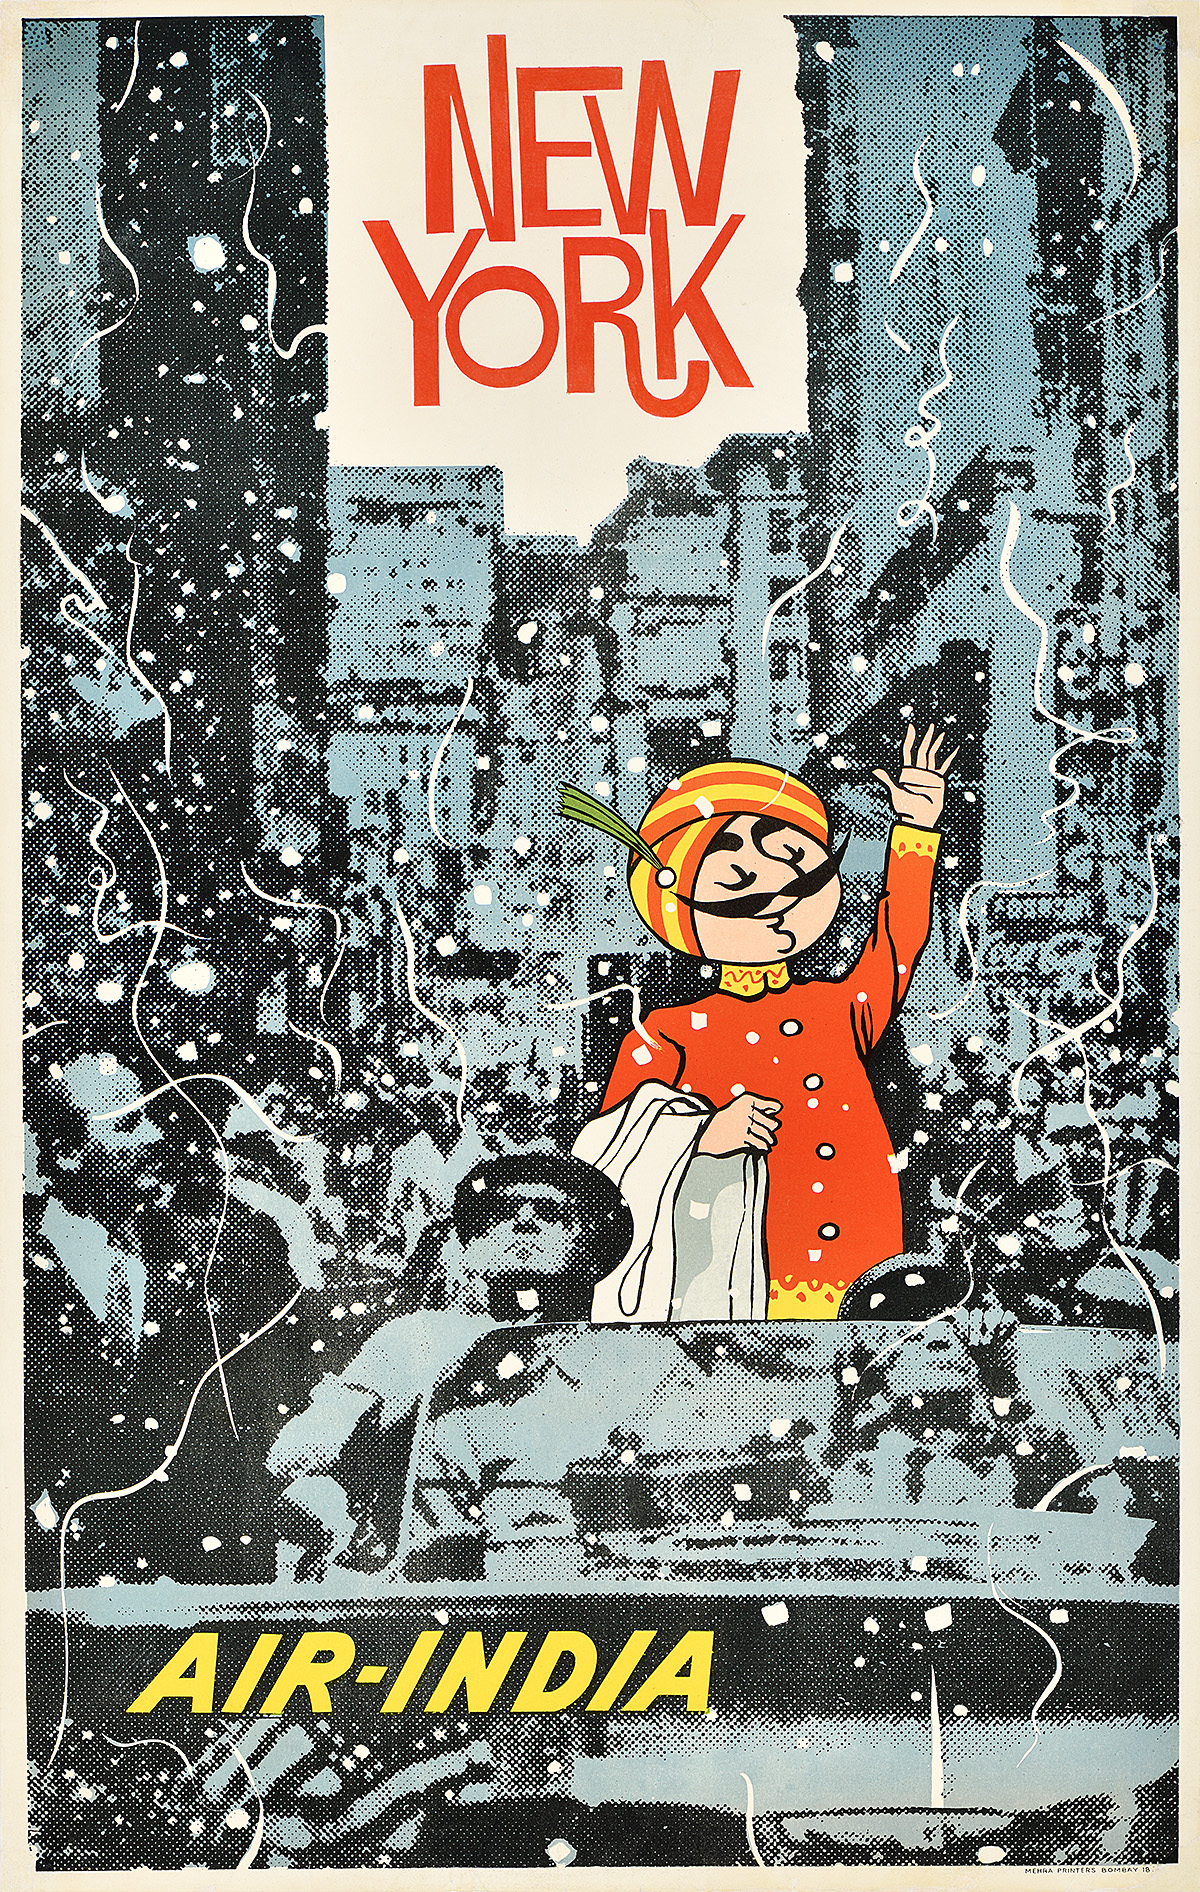 A poster of a mustachiod figure wearing a turban waving to a crowd of people while in a parade.